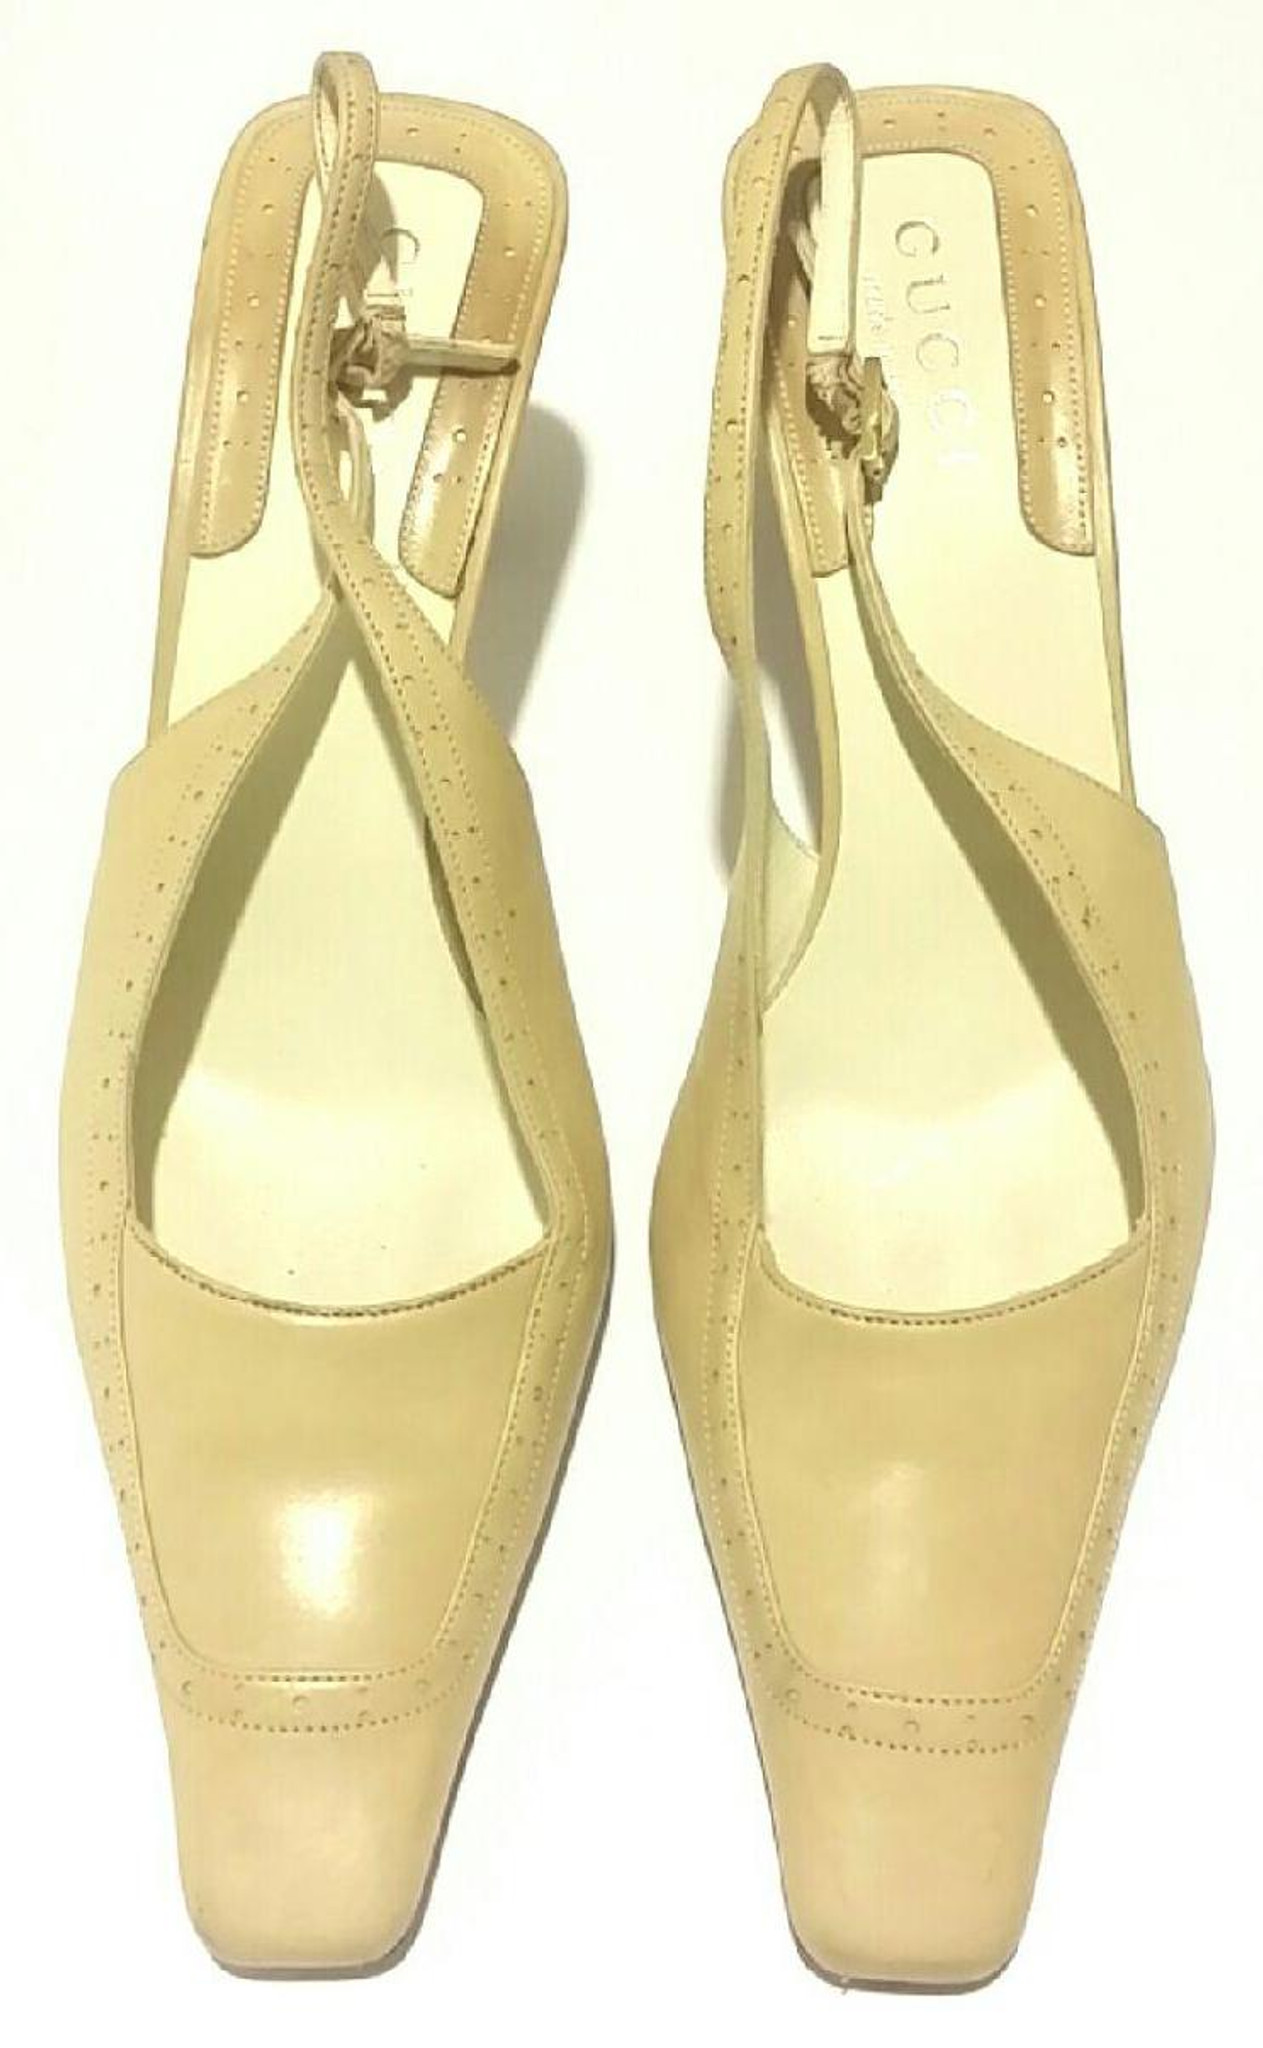 🔥STAY GOLD WITH GUCCI🔥 #resale Gently Used Gucci kitten heels, size 38C, $125 Call for purchase 905 842 4000 DM for PayPal. We ship…